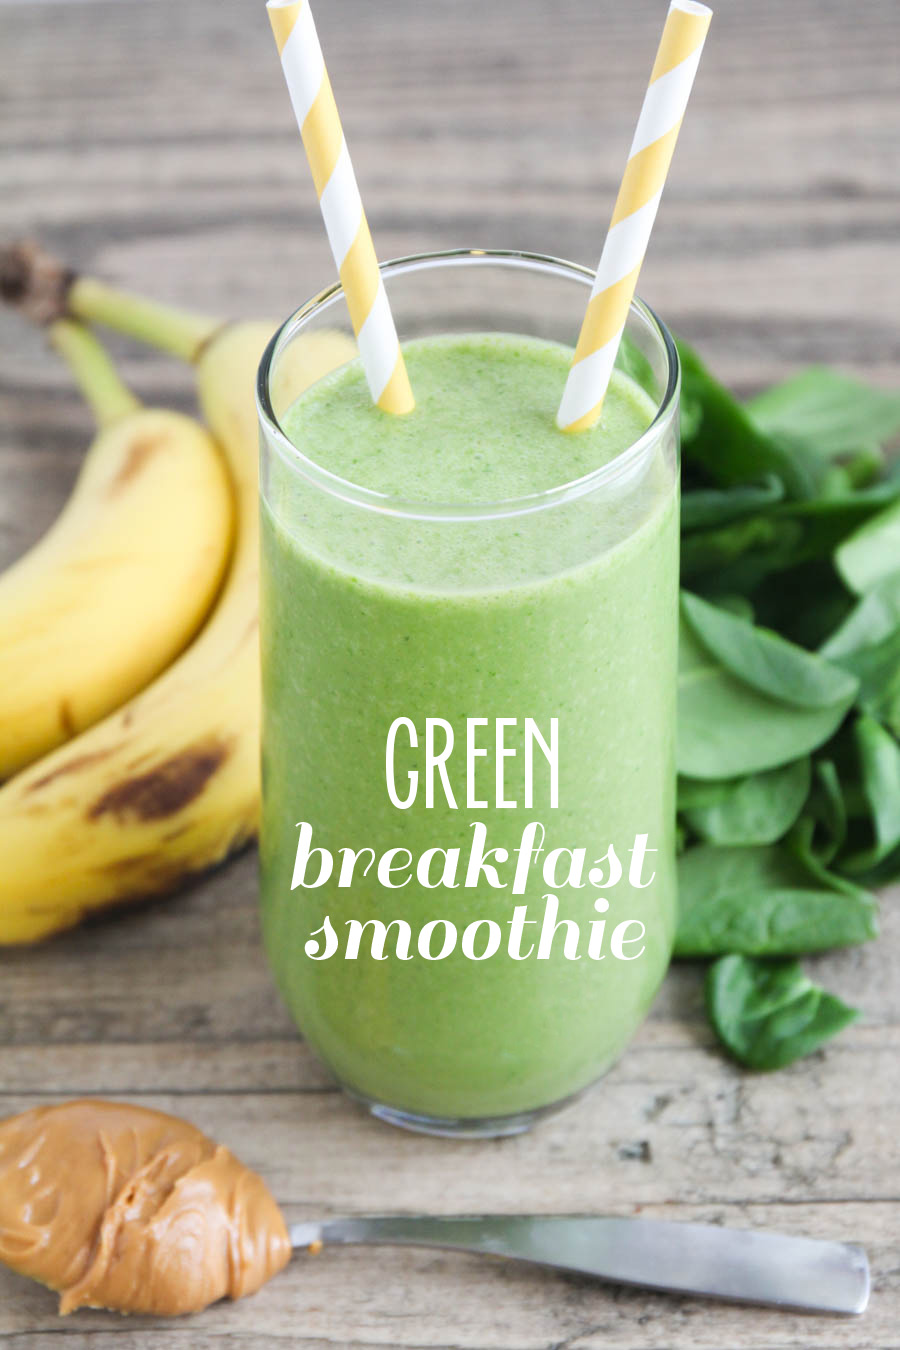 This easy and totally delicious dairy free green breakfast smoothie is the perfect energizing start to your day!